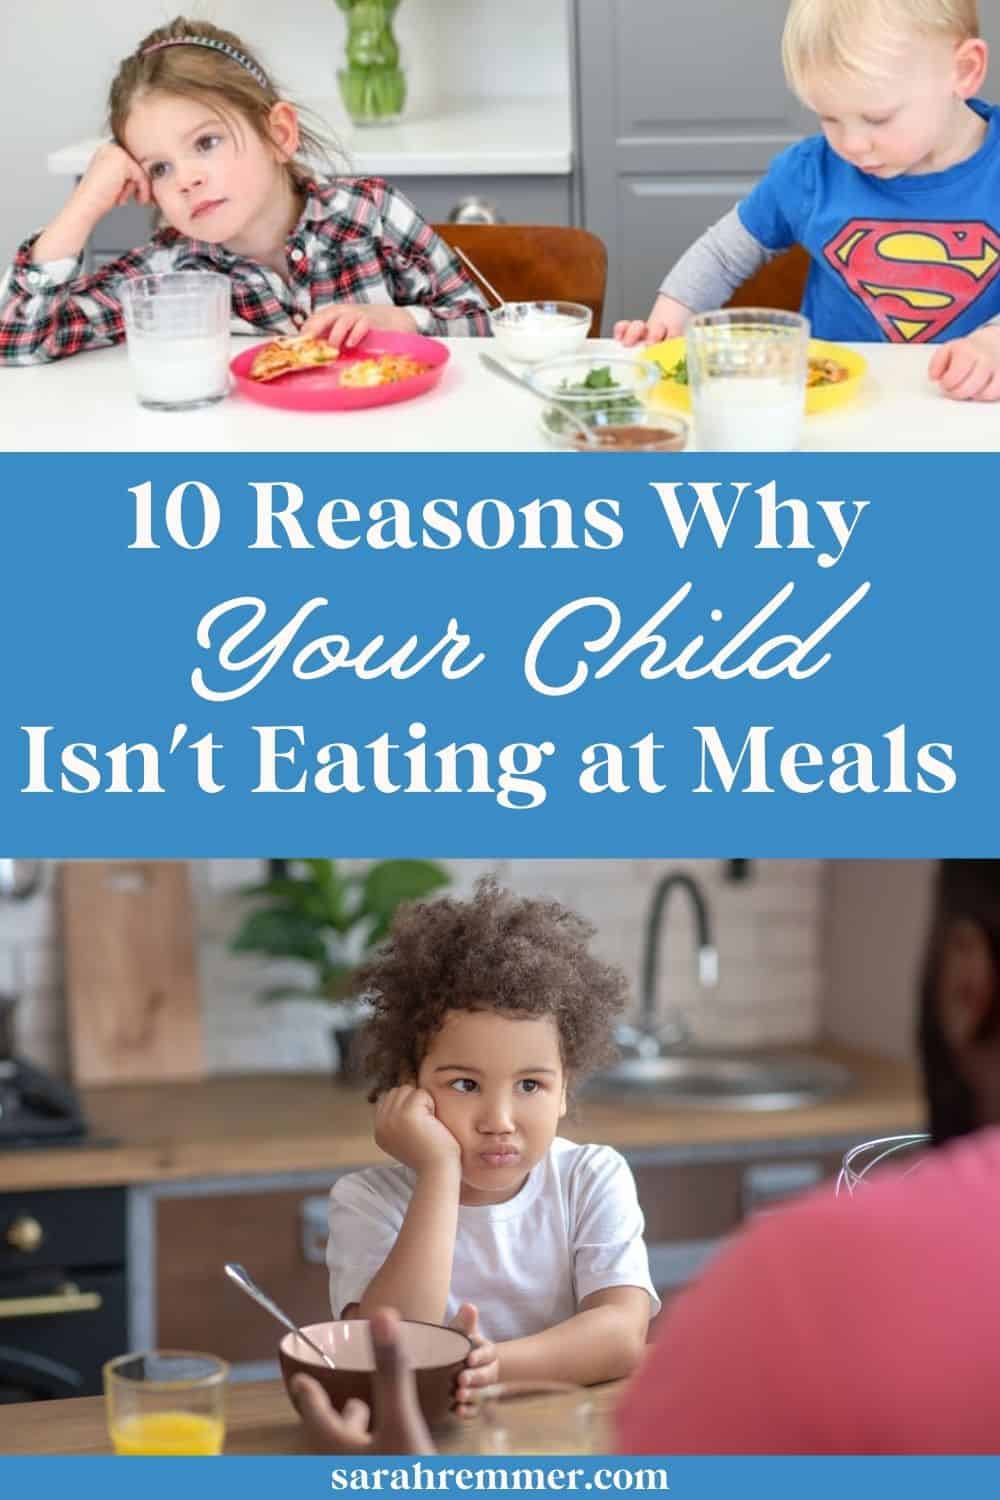 https://www.sarahremmer.com/wp-content/uploads/2020/11/10-Reasons-Why-your-Child-Isnt-Eating-at-Meals.jpg